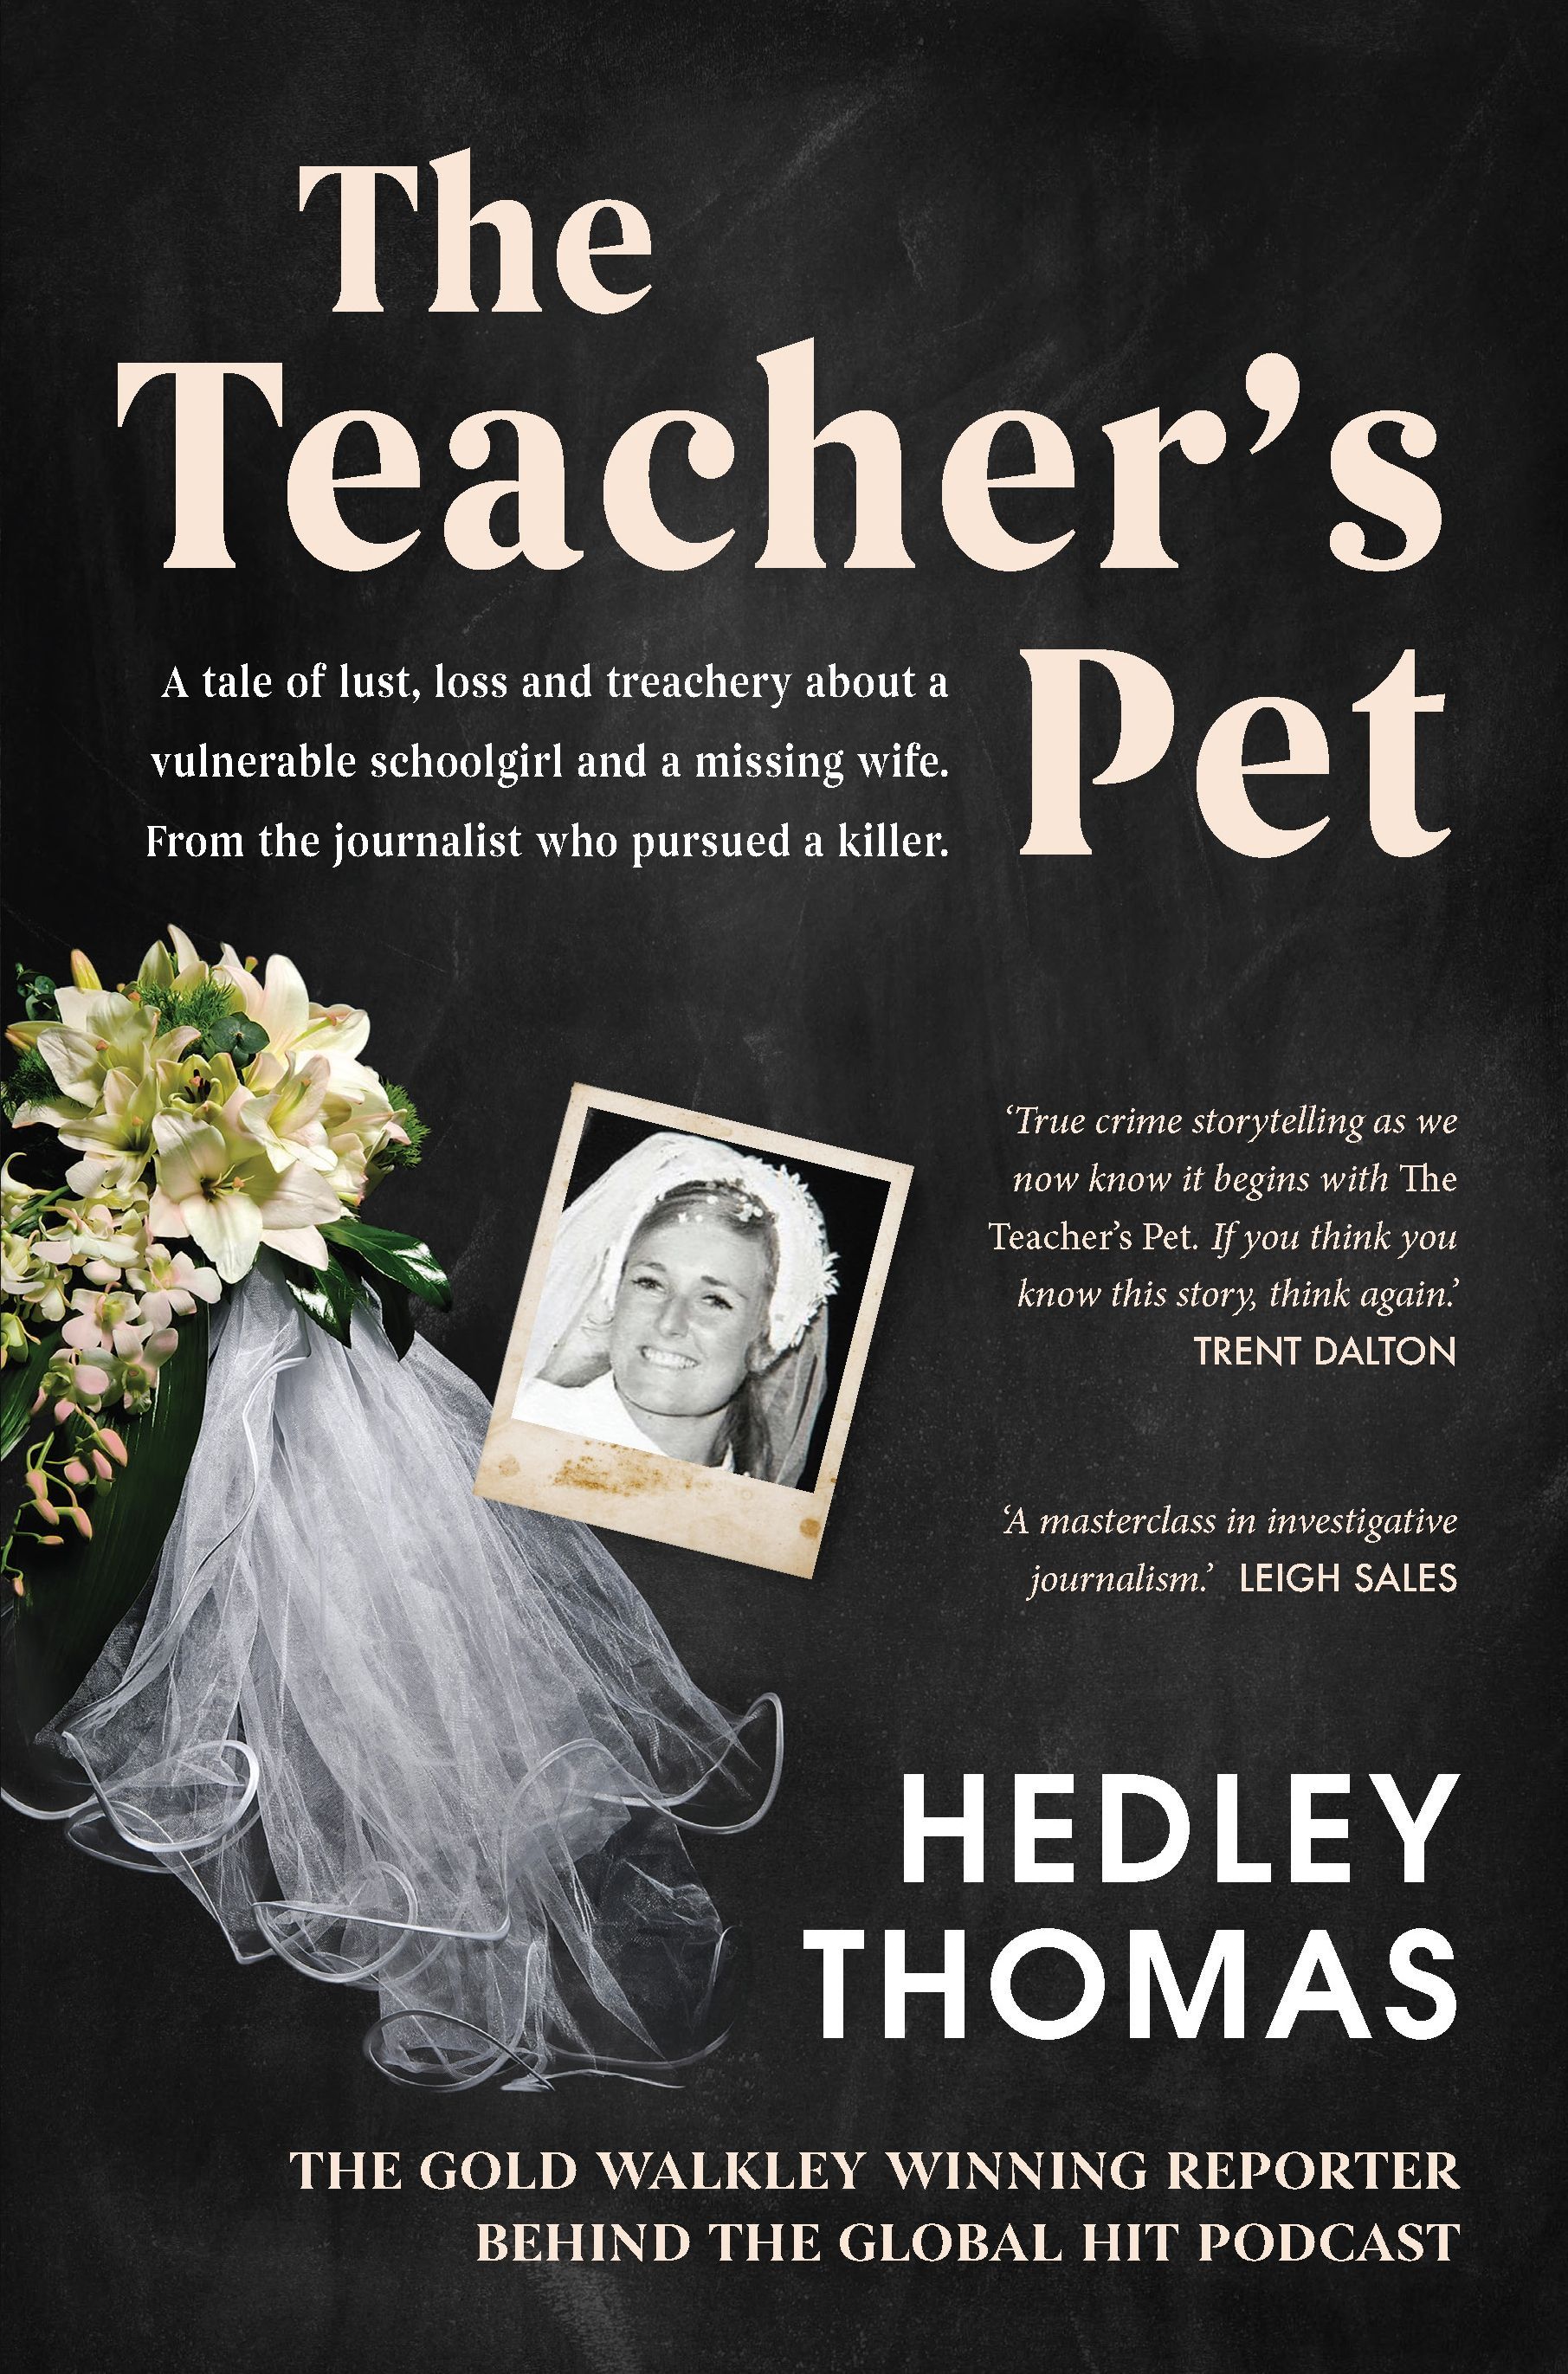 a book titled the teacher 's pet by hedley thomas